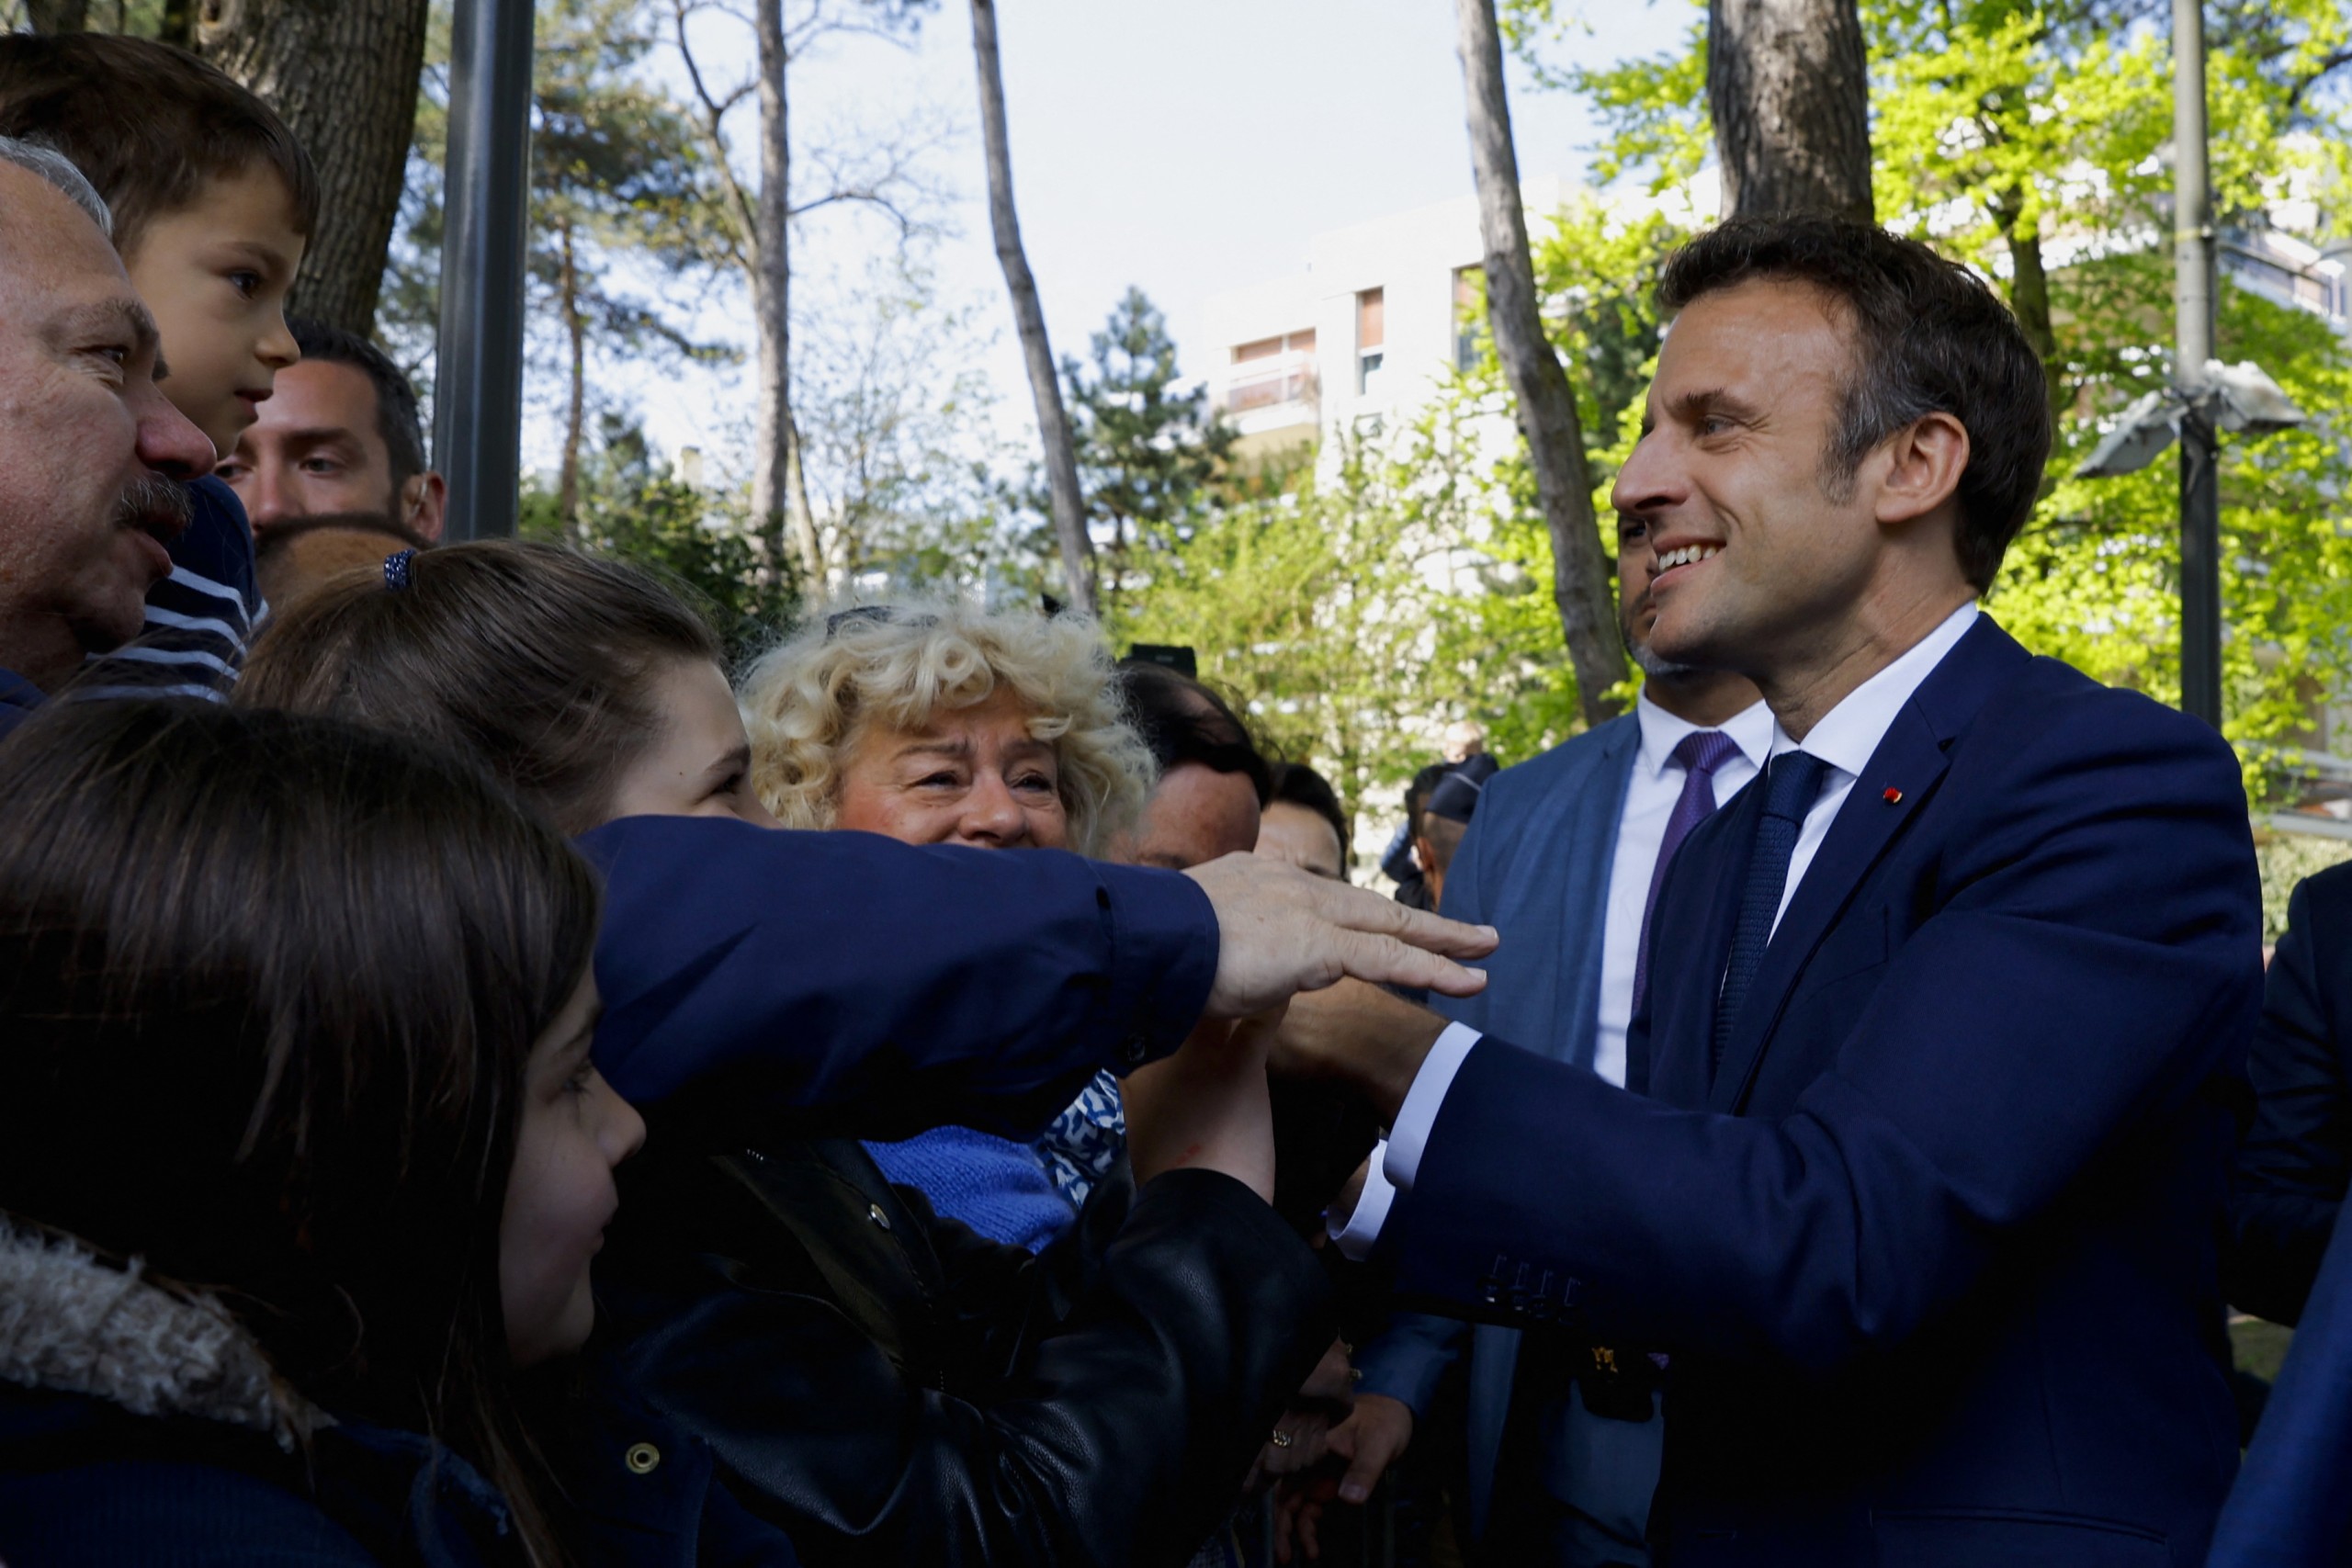 epa09906375 French President and candidate for re-election, Emmanuel Macron (R) greets supporters as he arrives to vote in the second round of the 2022 French presidential election, at a polling station in Le Touquet, France, 24 April 2022.  EPA/GONZALO FUENTES / POOL  MAXPPP OUT